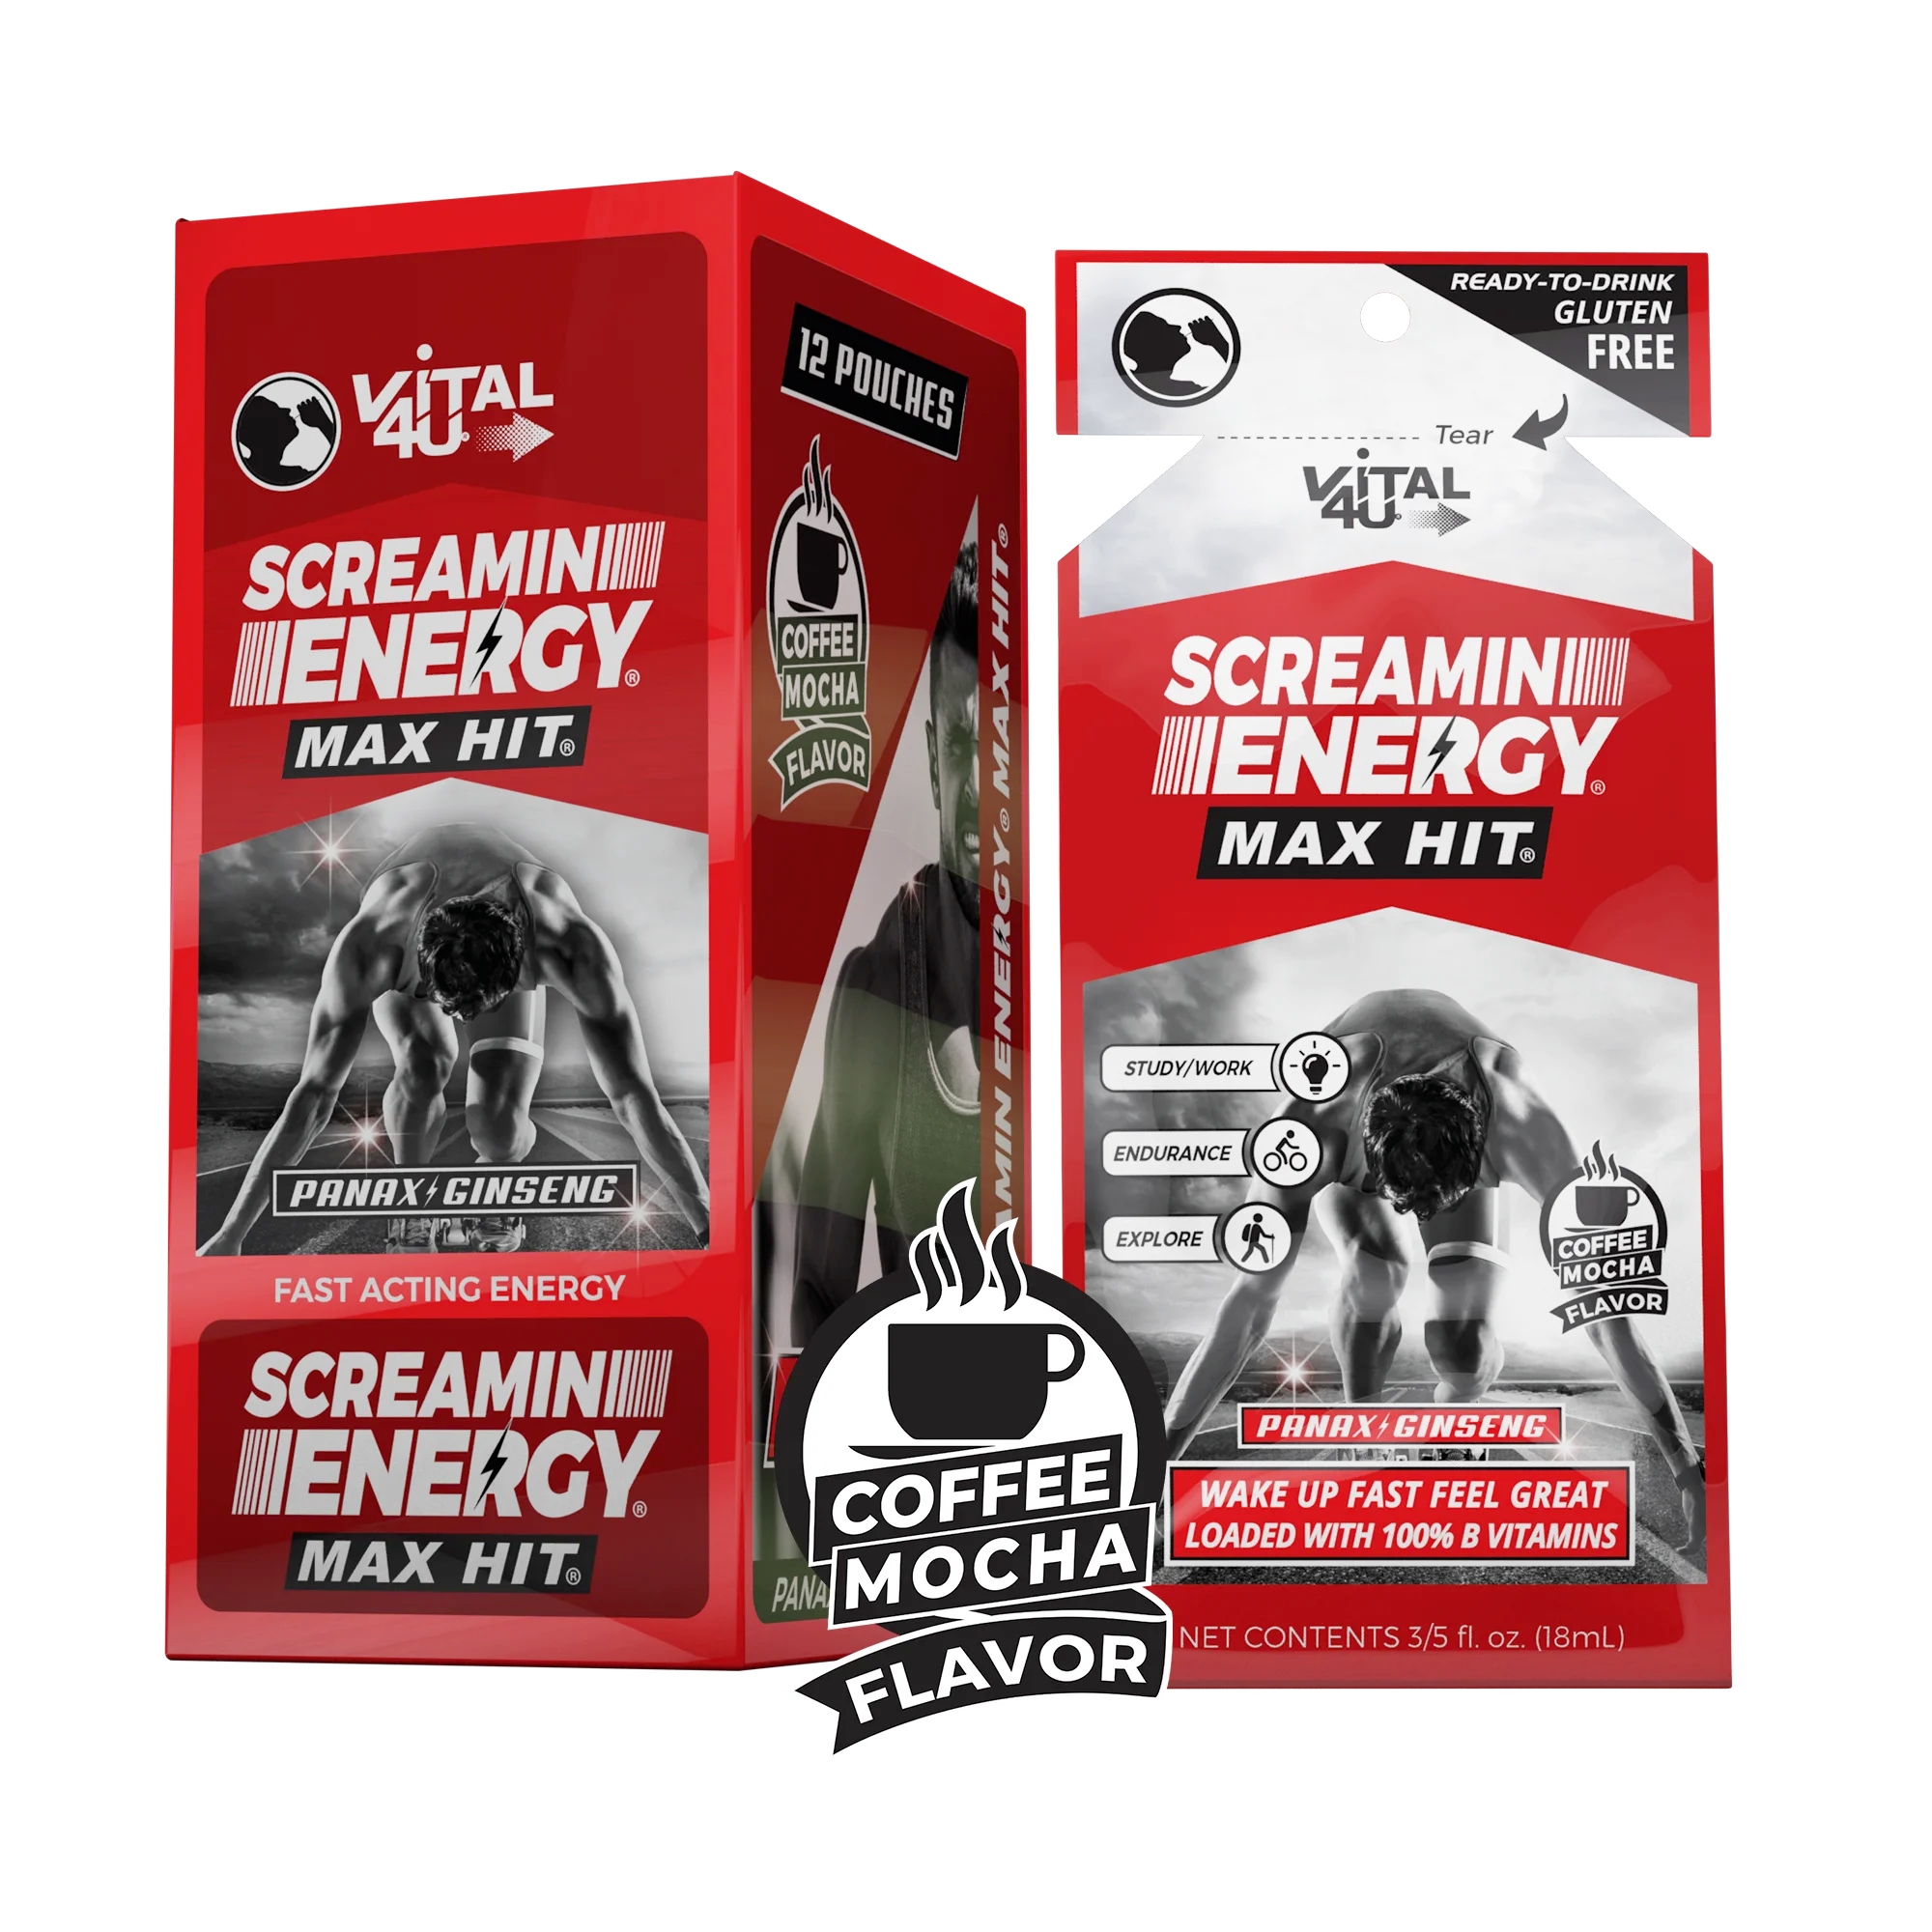 Screamin Energy Max Hit Coffee Mocha Flavor Box and Pouch 12 Ct